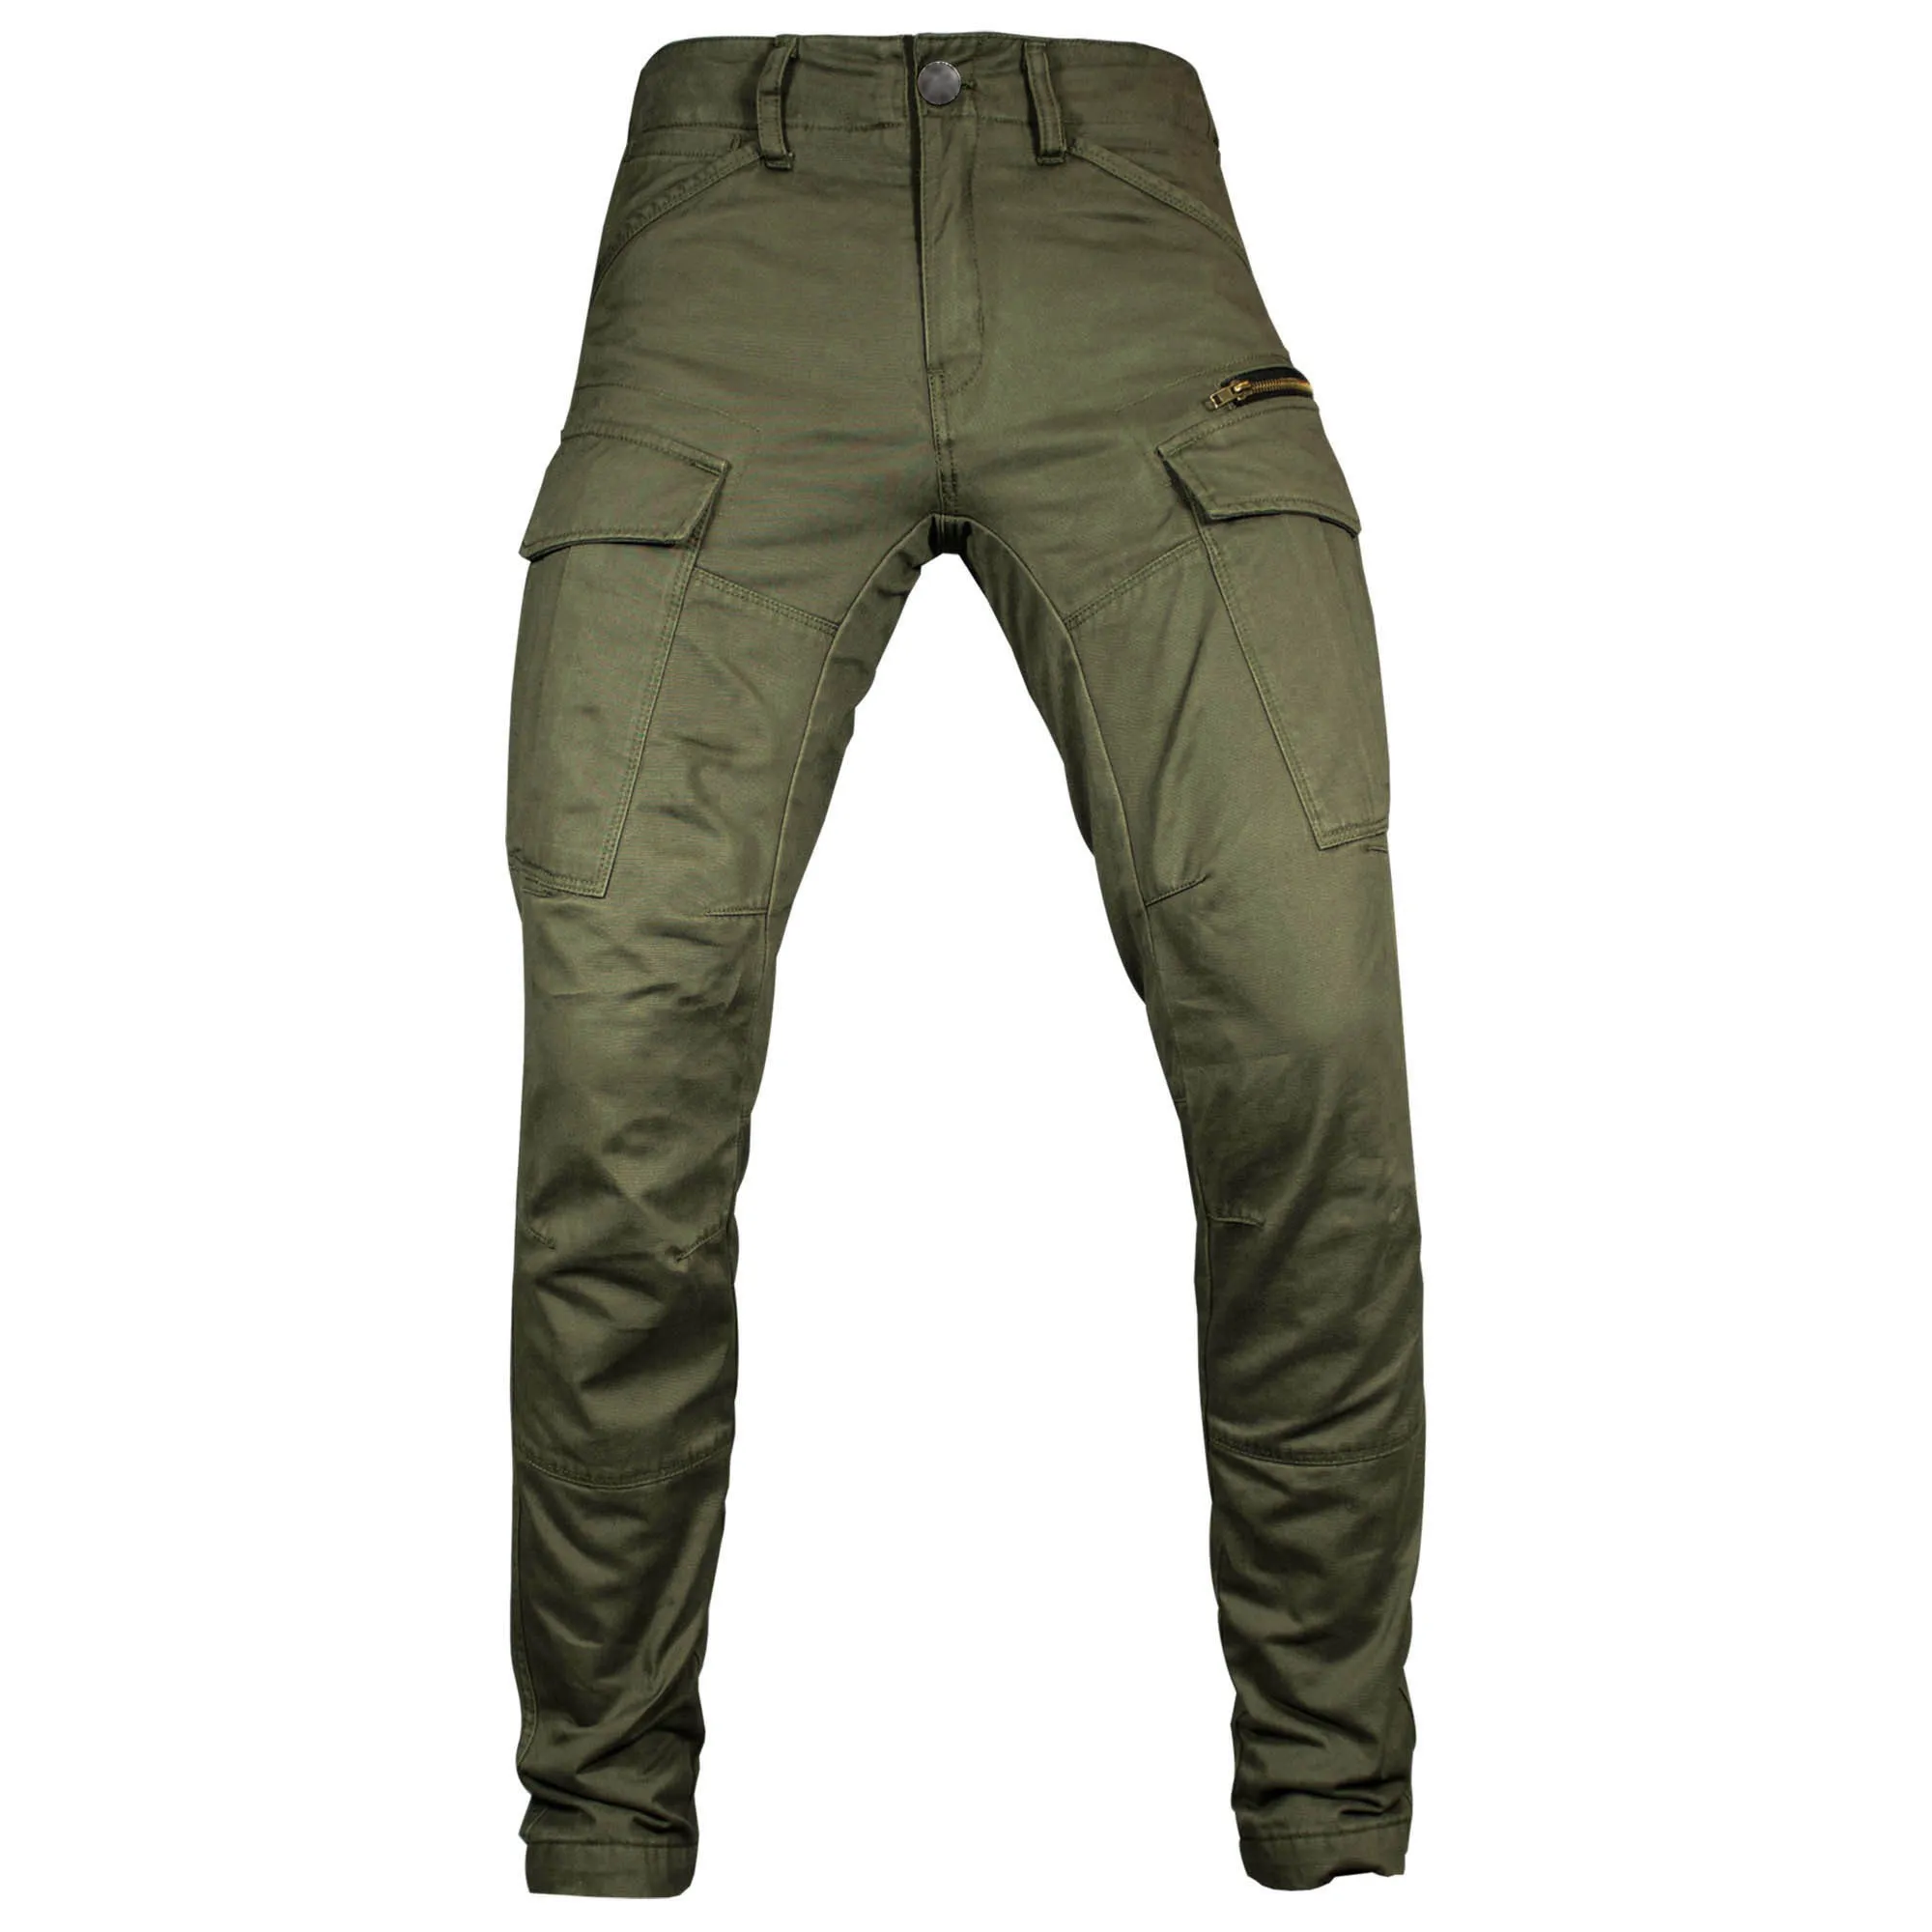 Men's Cargo Trousers Work Wear Cargo Pans with Side Pocket Full Pants Casual Men Hiking Pants Outdoors Trousers Cargo Pants